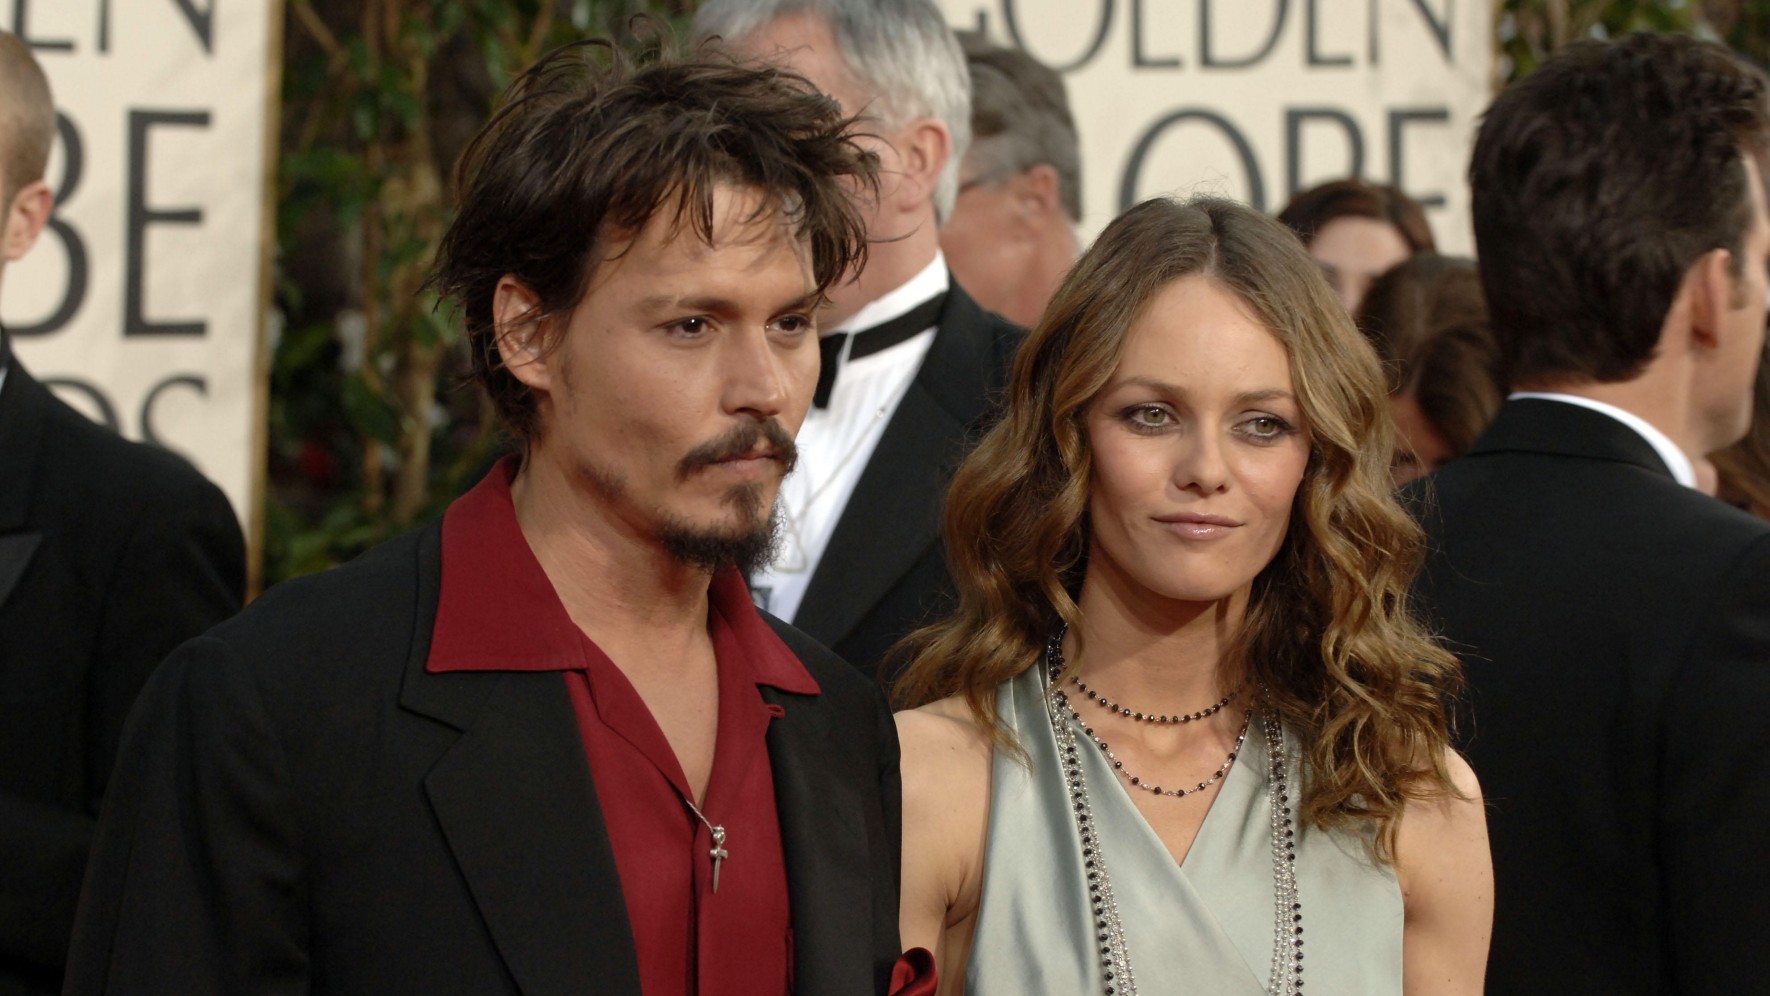 Depp and Paradis at the Golden Globes in 2006